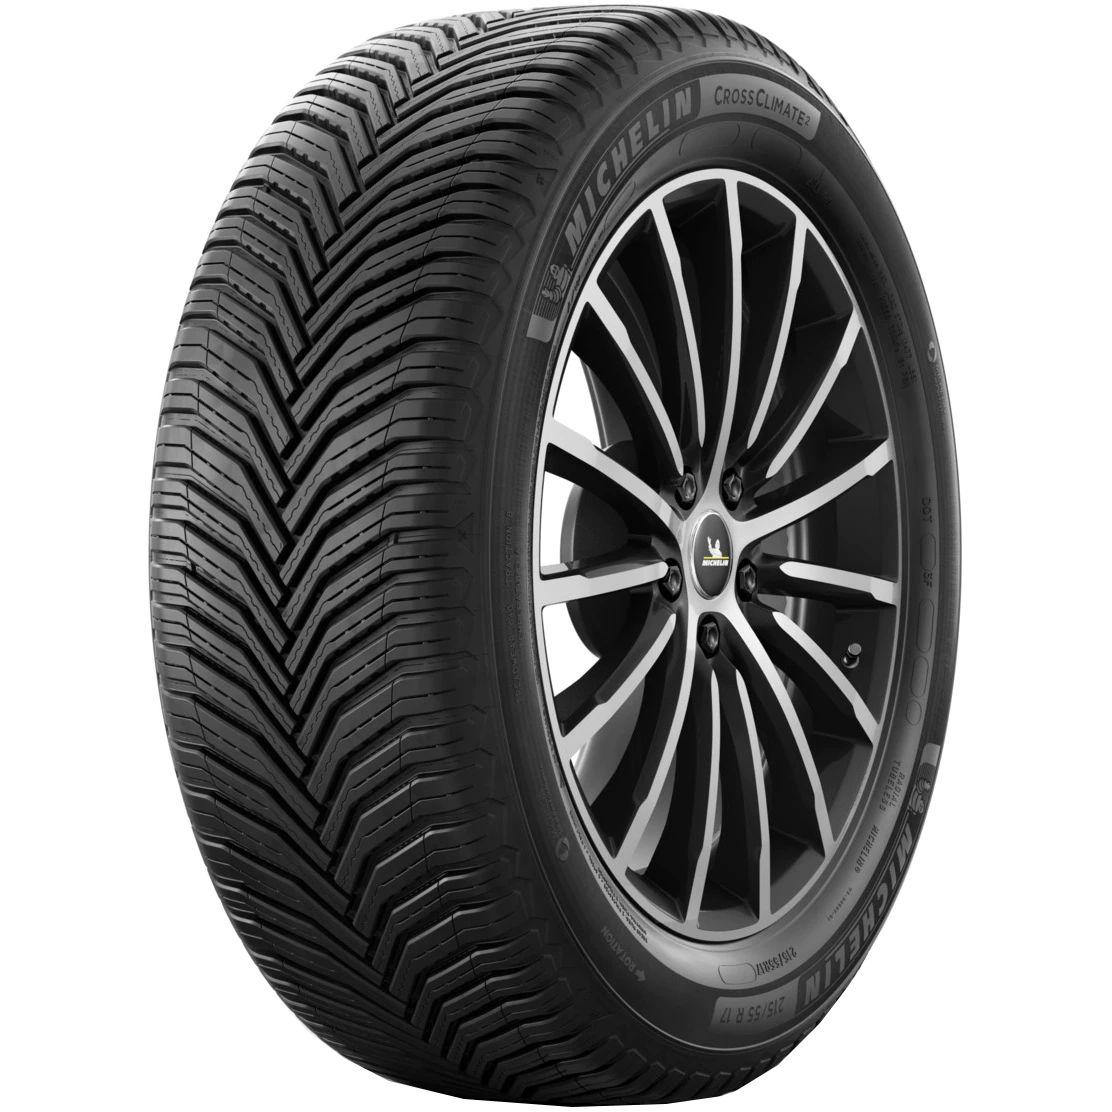 Anvelope all seasons MICHELIN CrossClimate2 M+S 205/55 R16 91W